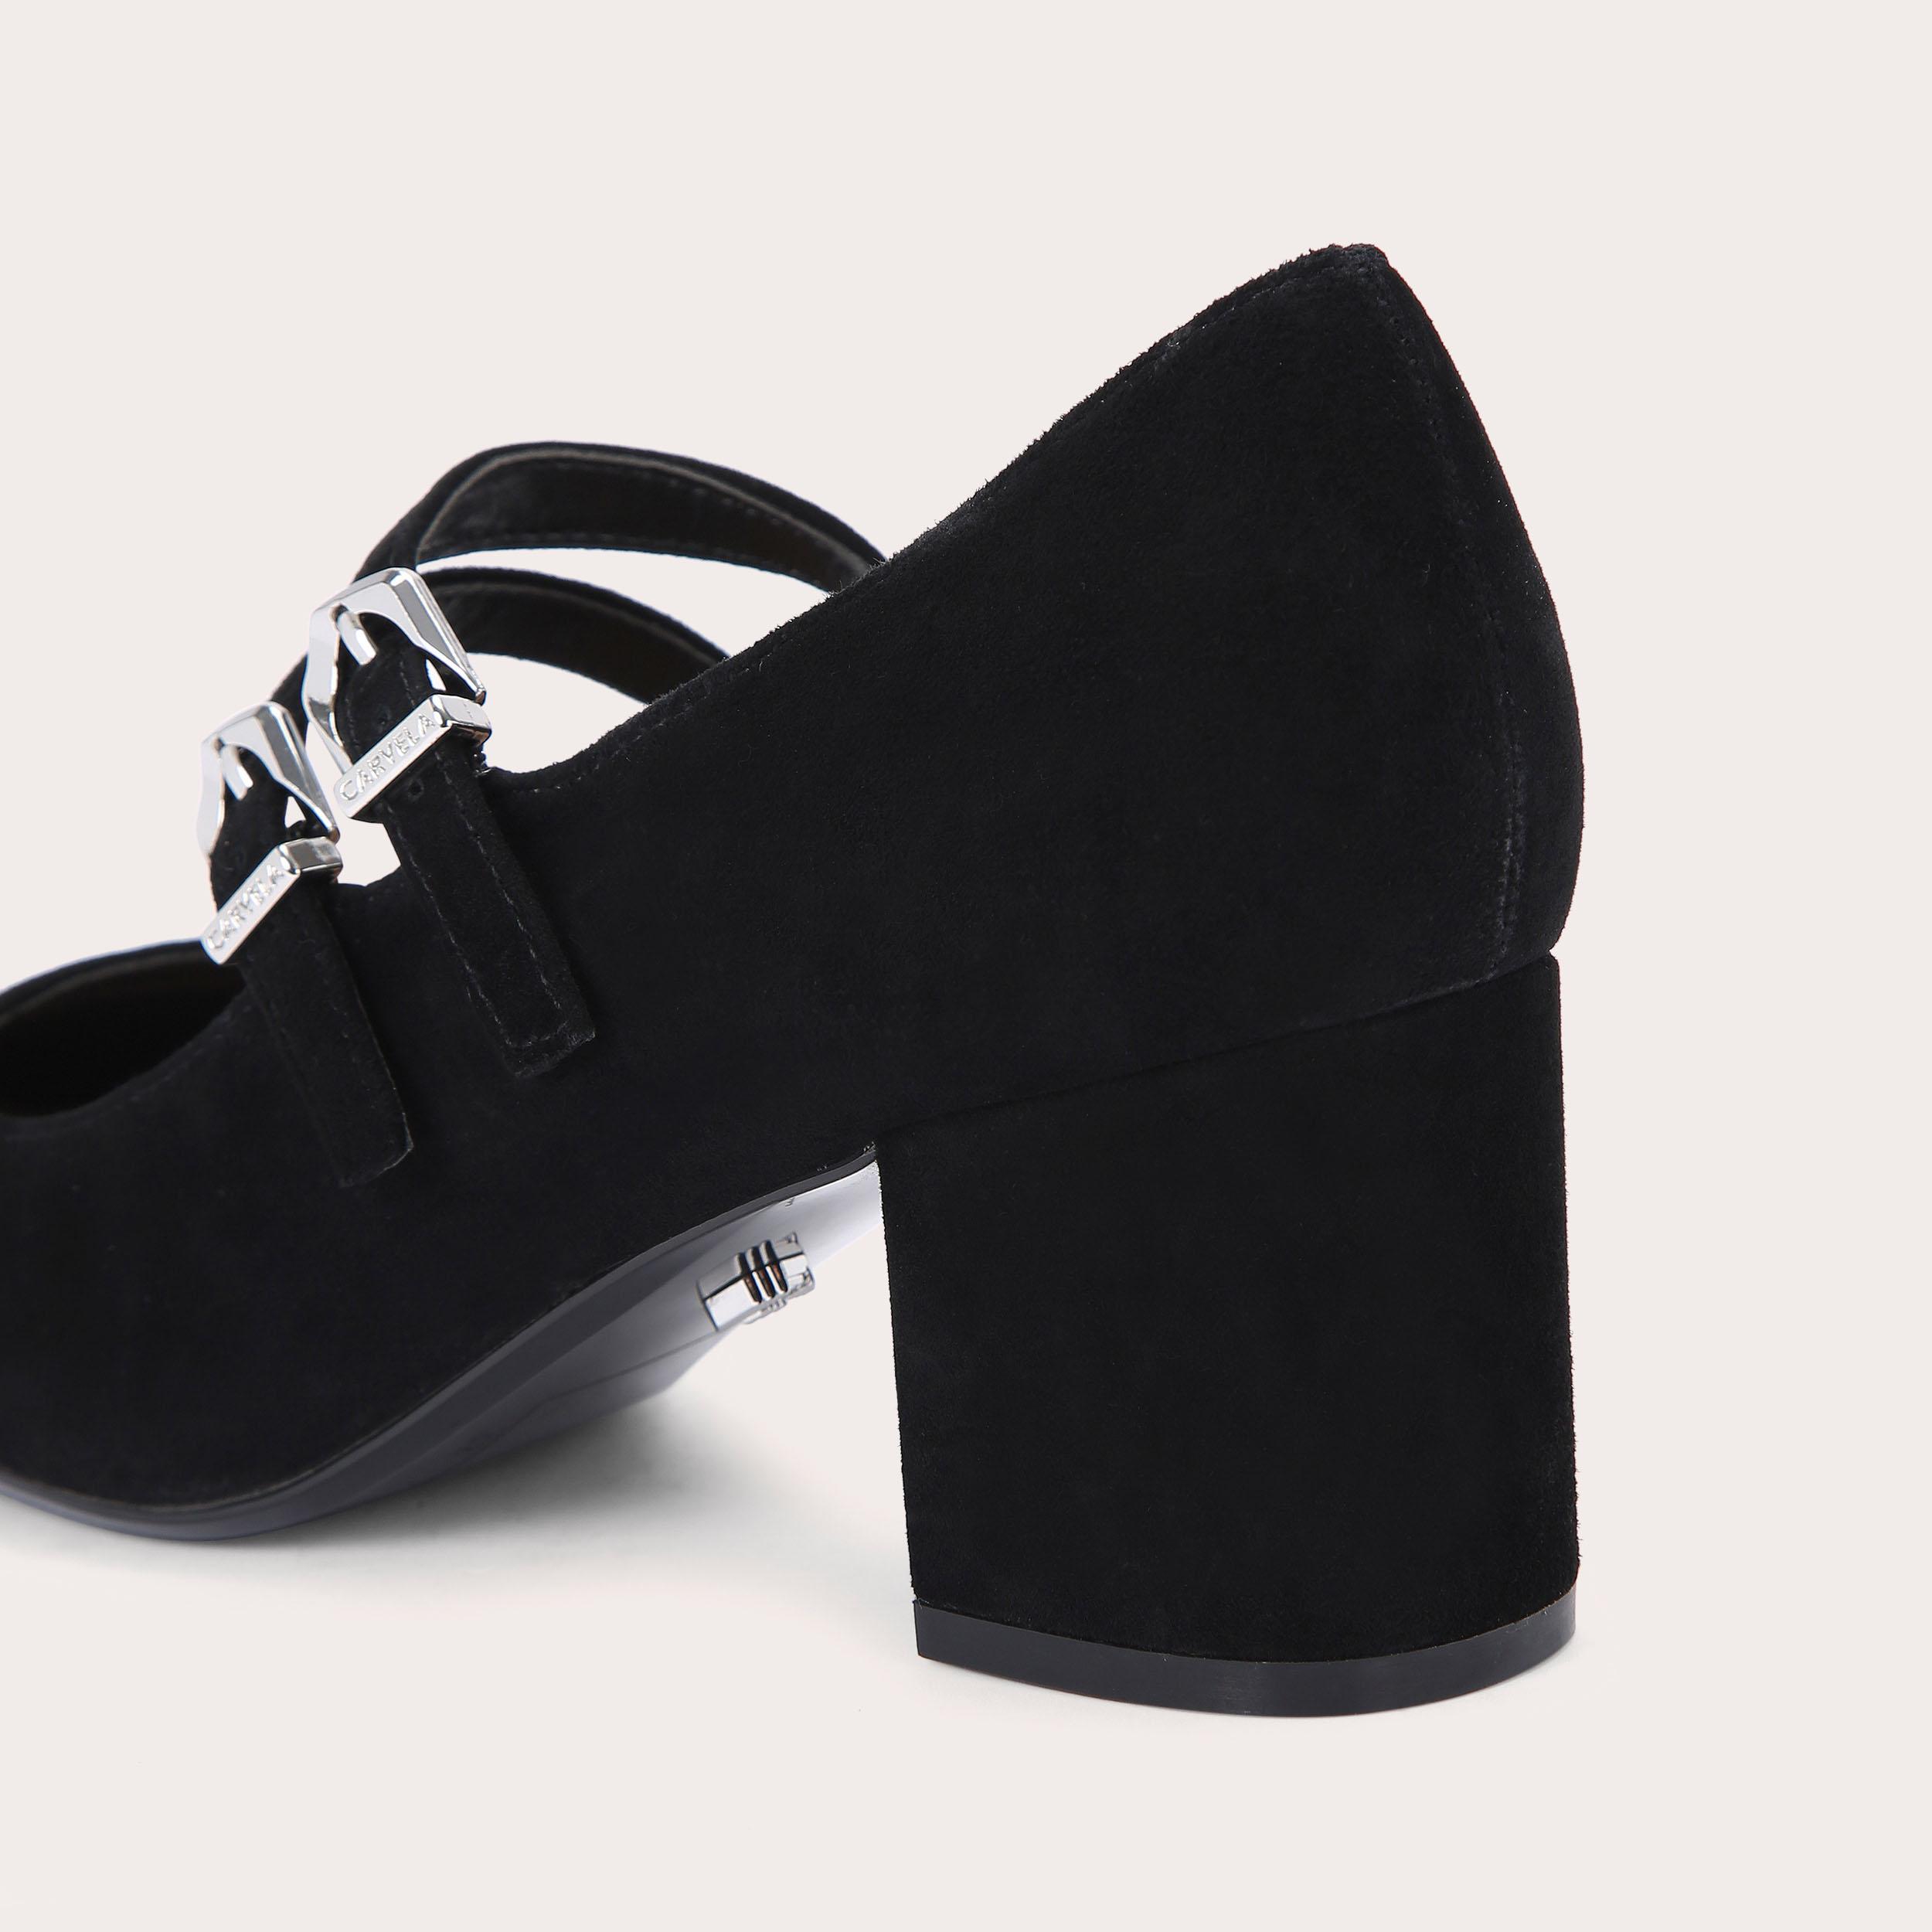 HARPER Black Suede Mary Jane Shoes by CARVELA